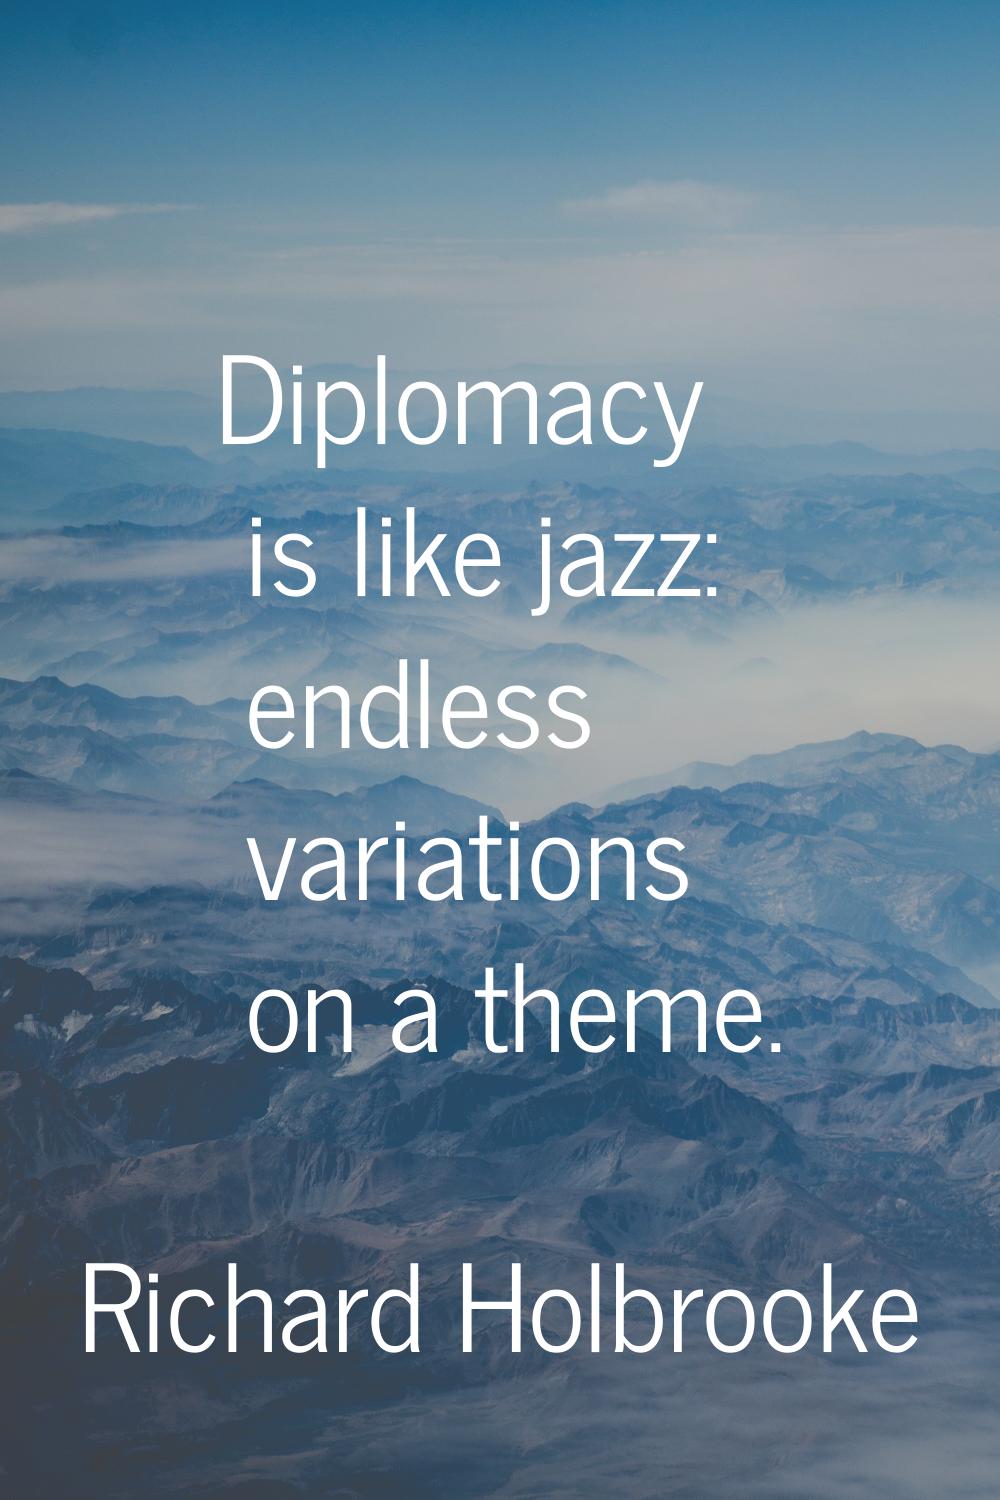 Diplomacy is like jazz: endless variations on a theme.